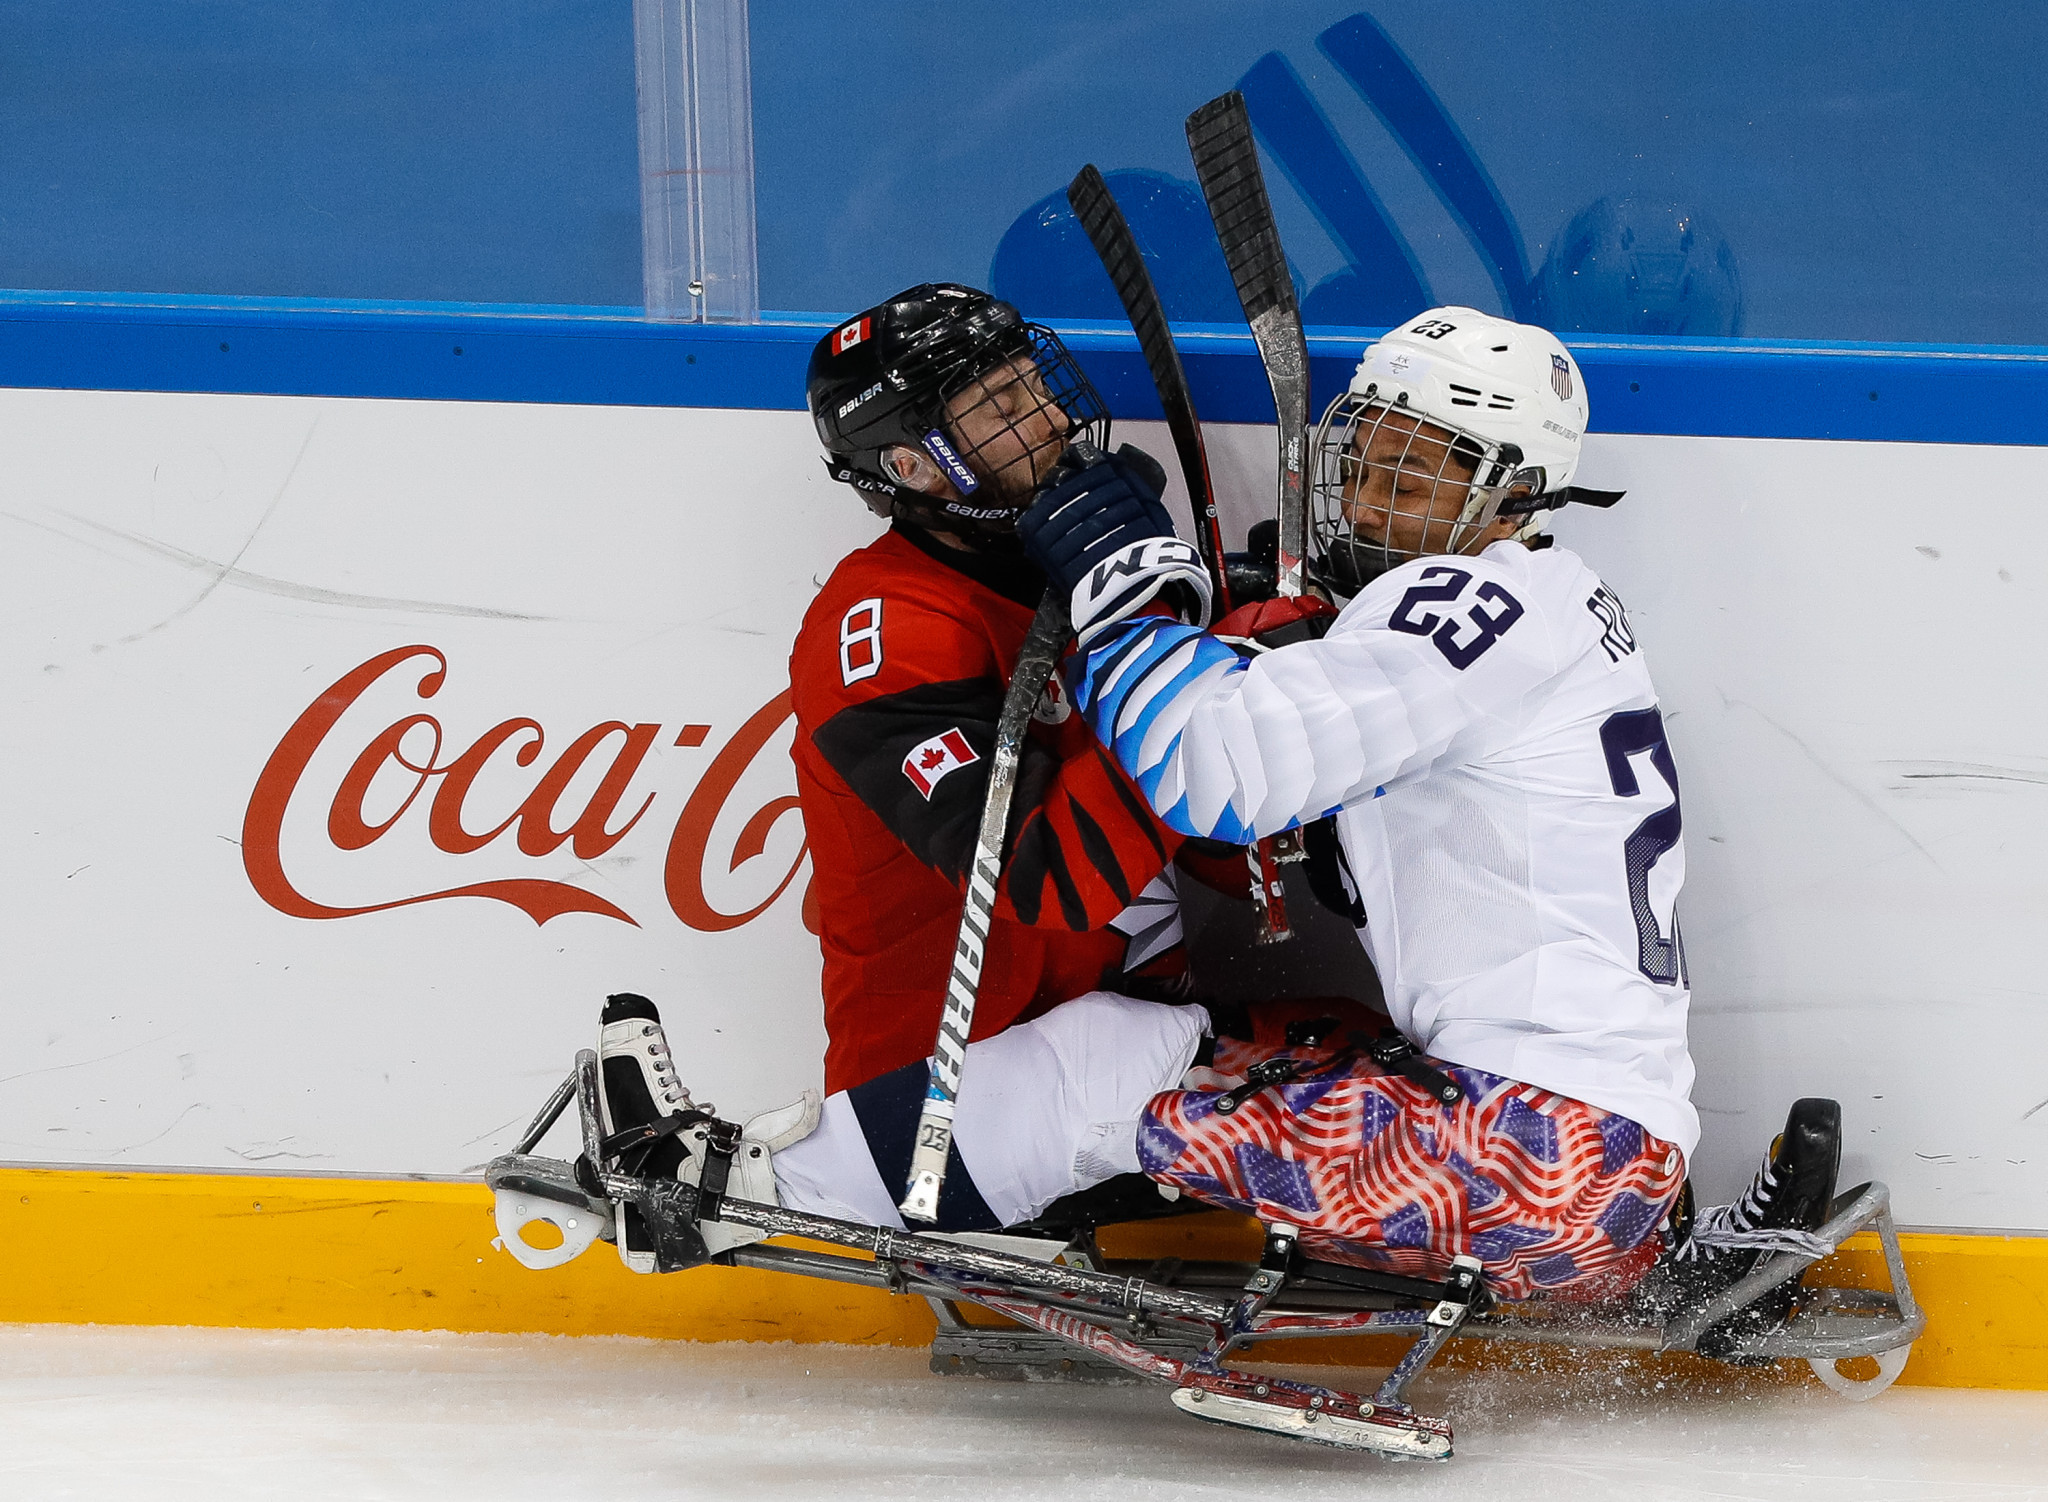 Canada and the United States are to face each other on the opening day of ice hockey at the Beijing 2022 Paralympics in a rematch of the Pyeongchang 2018 final ©Getty Images